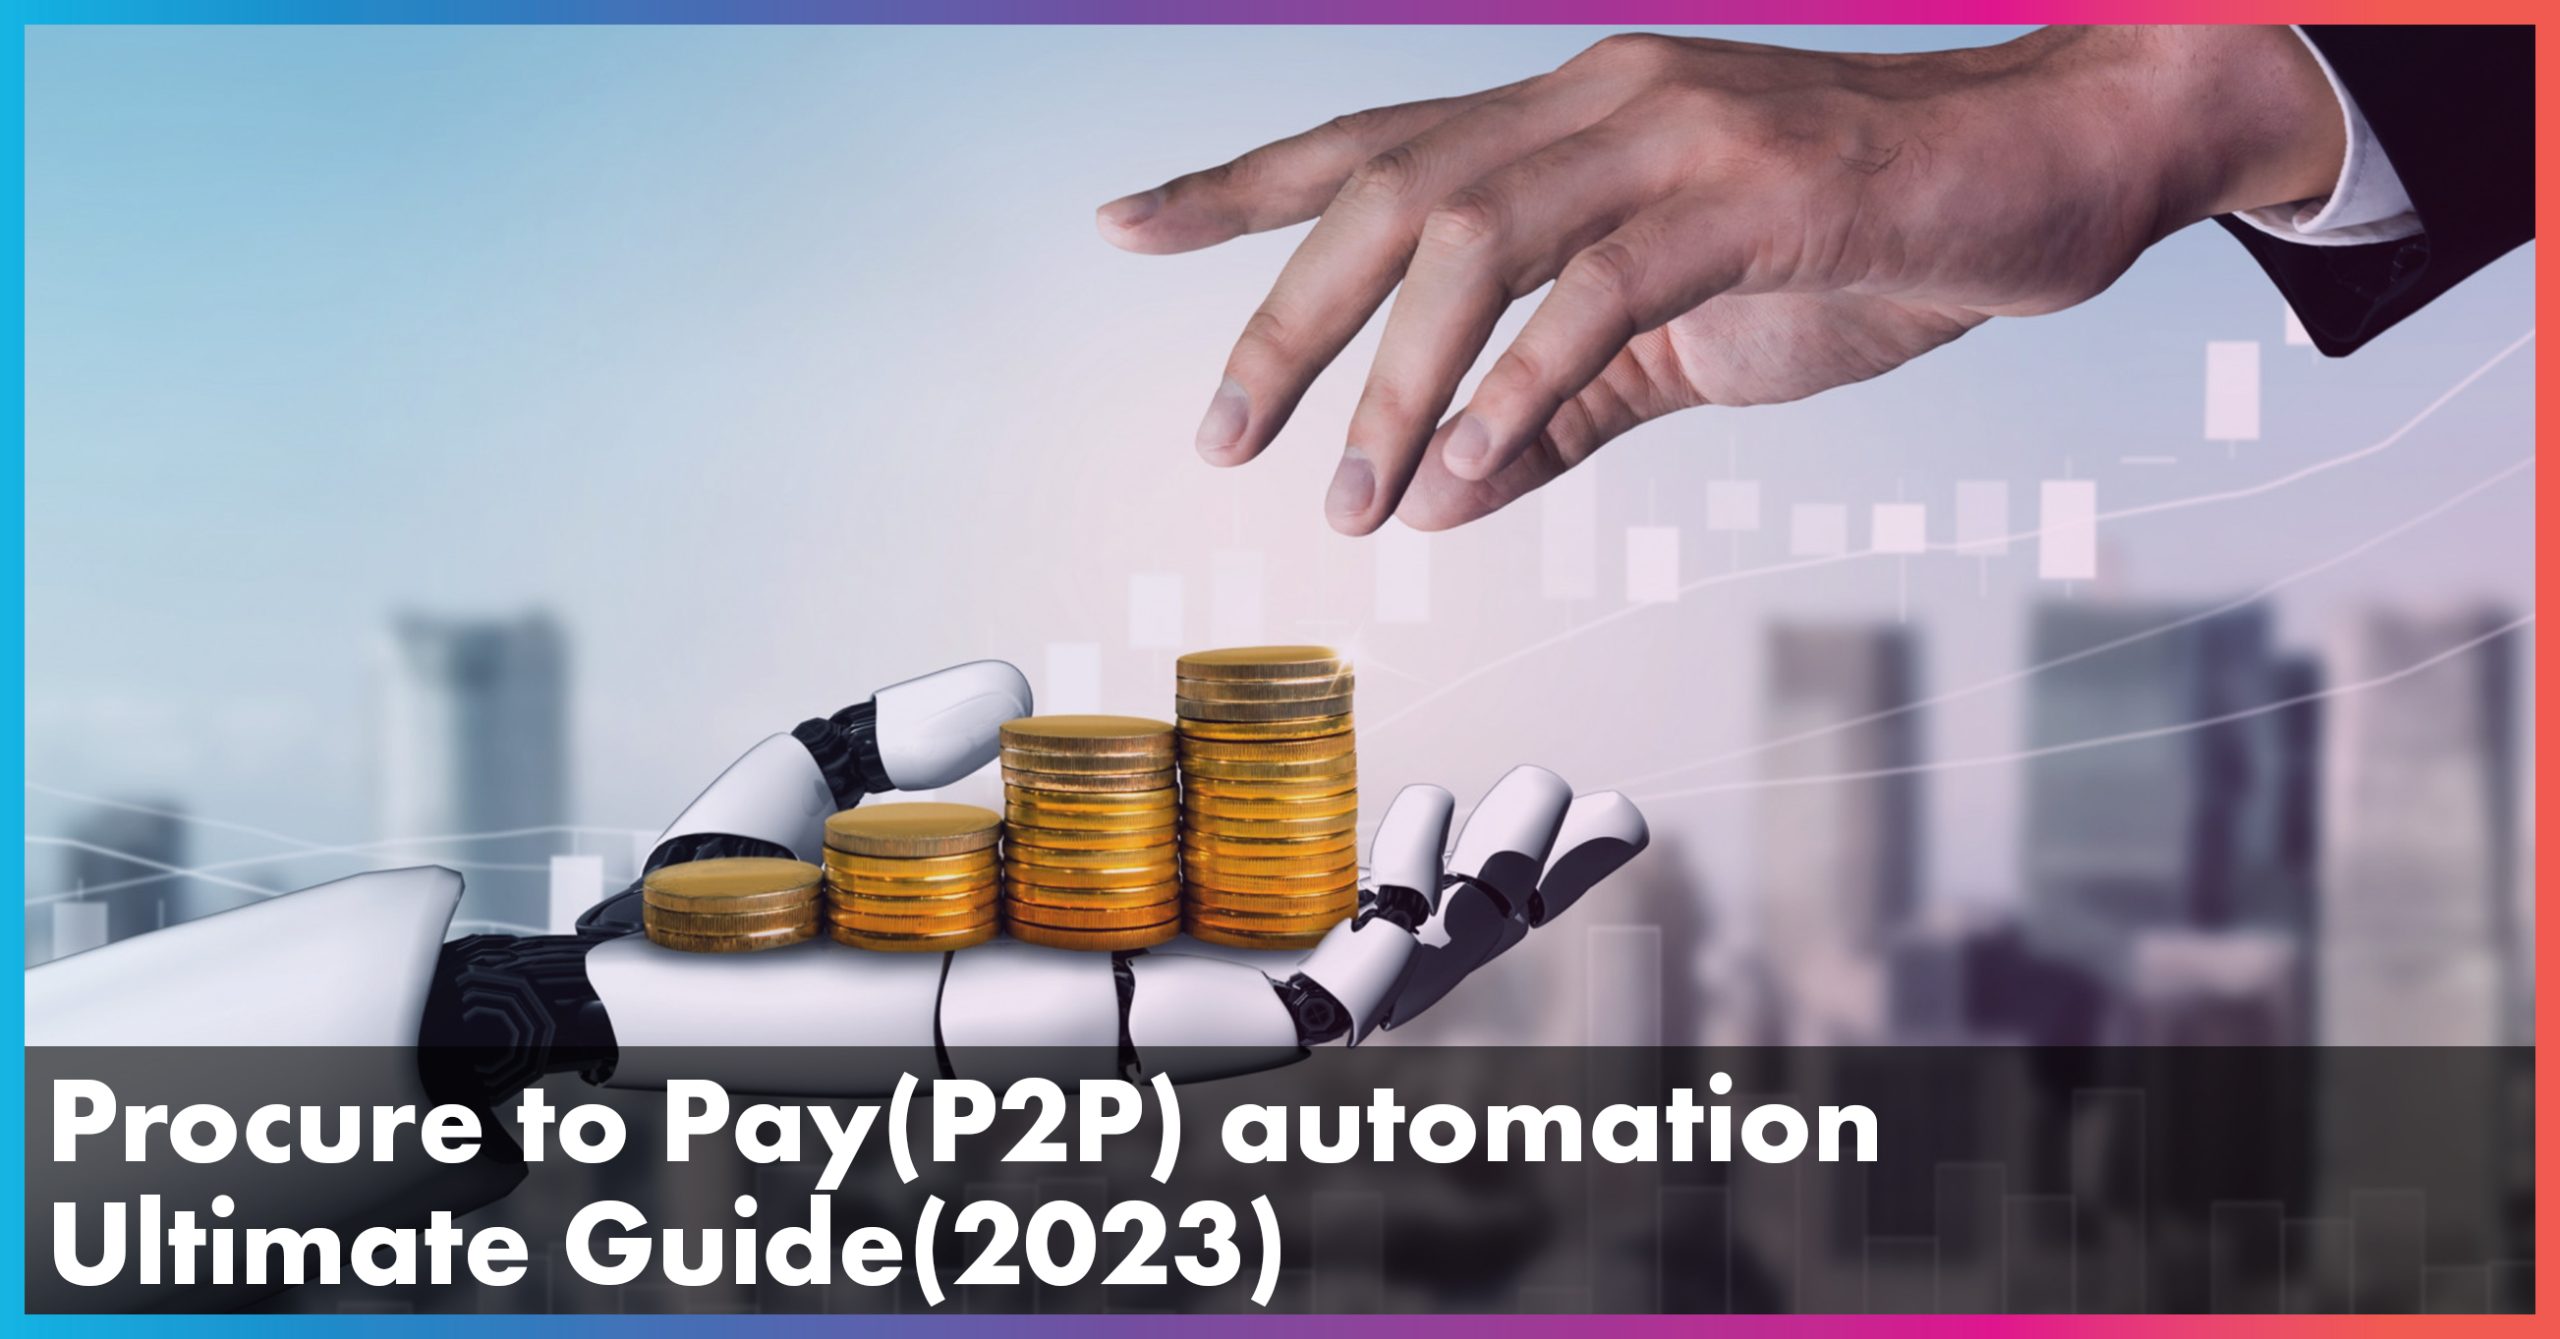 The Ultimate Guide to Procure to Pay(P2P) Automation in 2023